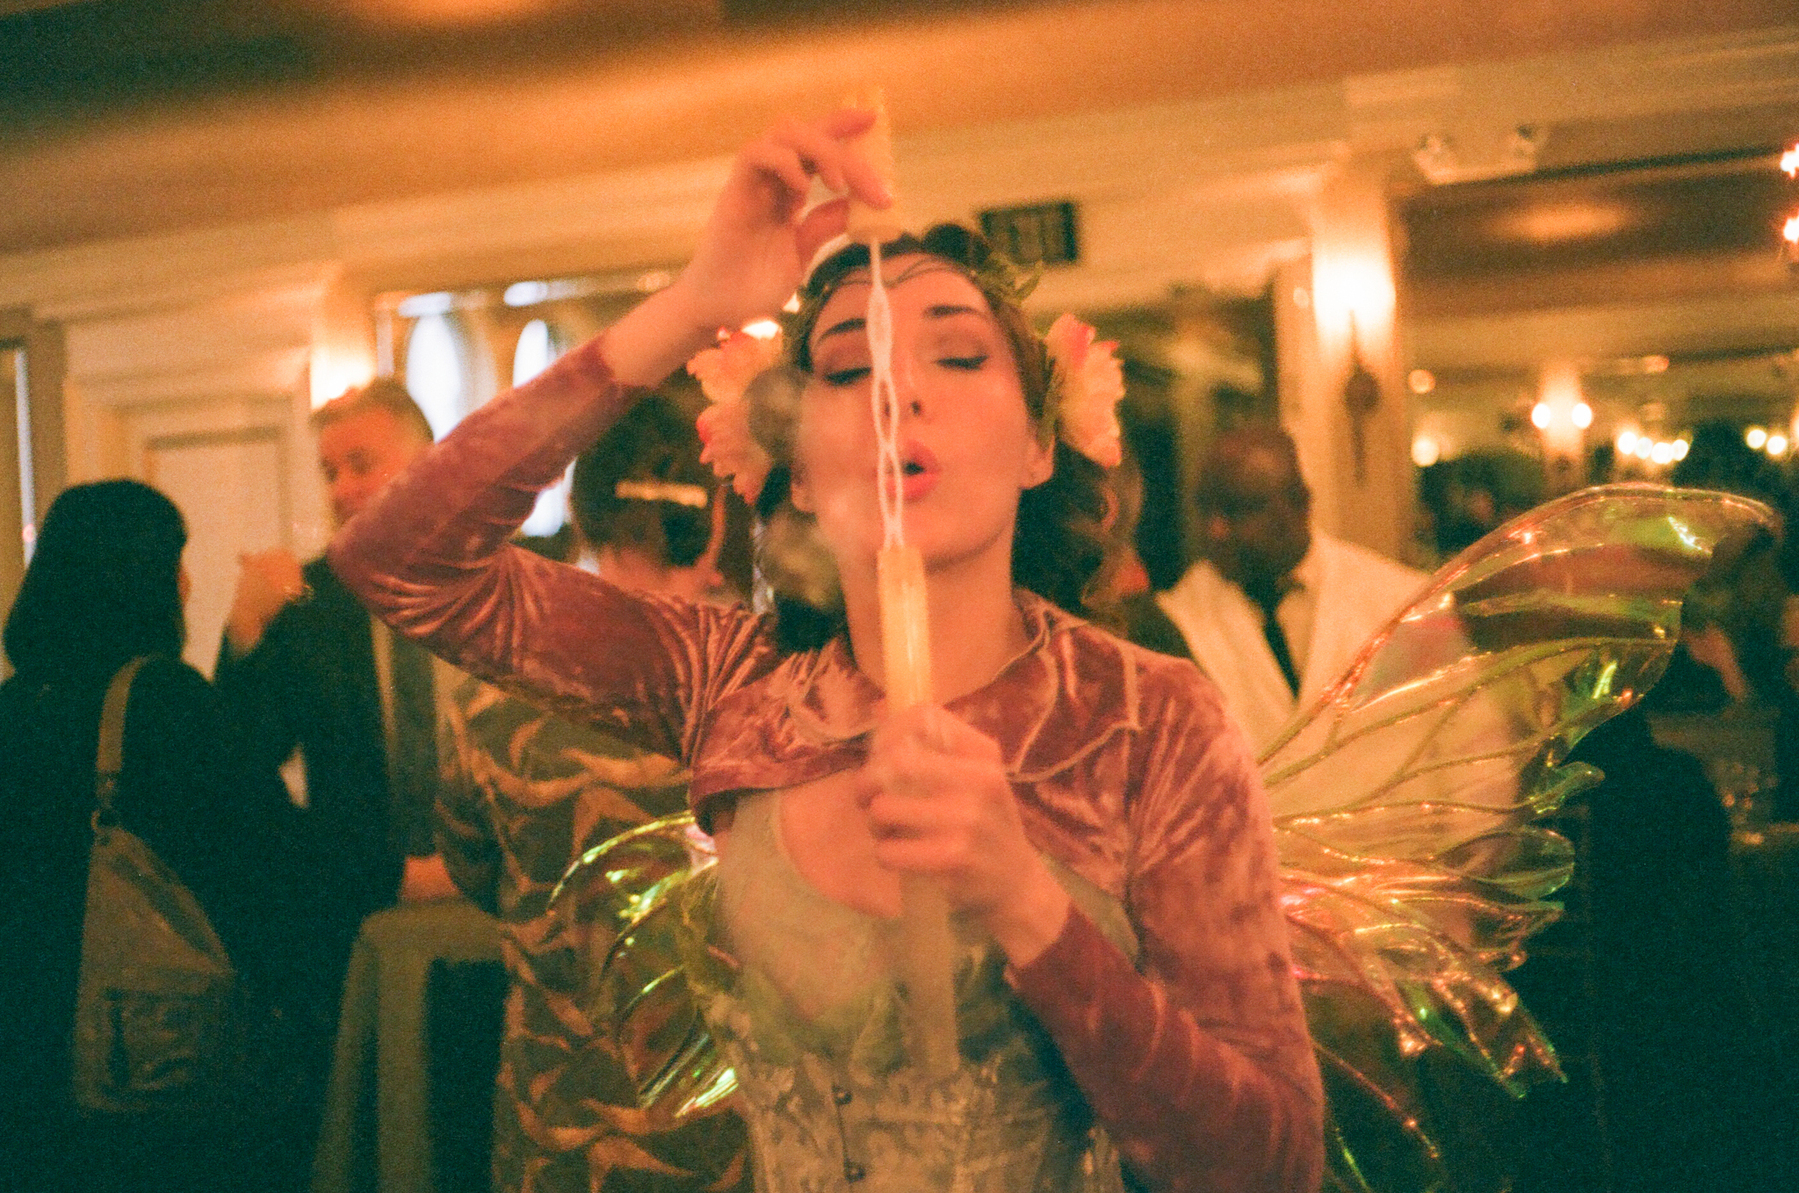 a scan of a color photograph showing a beautiful woman dressed as a fairy, blowing bubbles at the camera, in a ballroom-like setting filled with people wearing formal attire